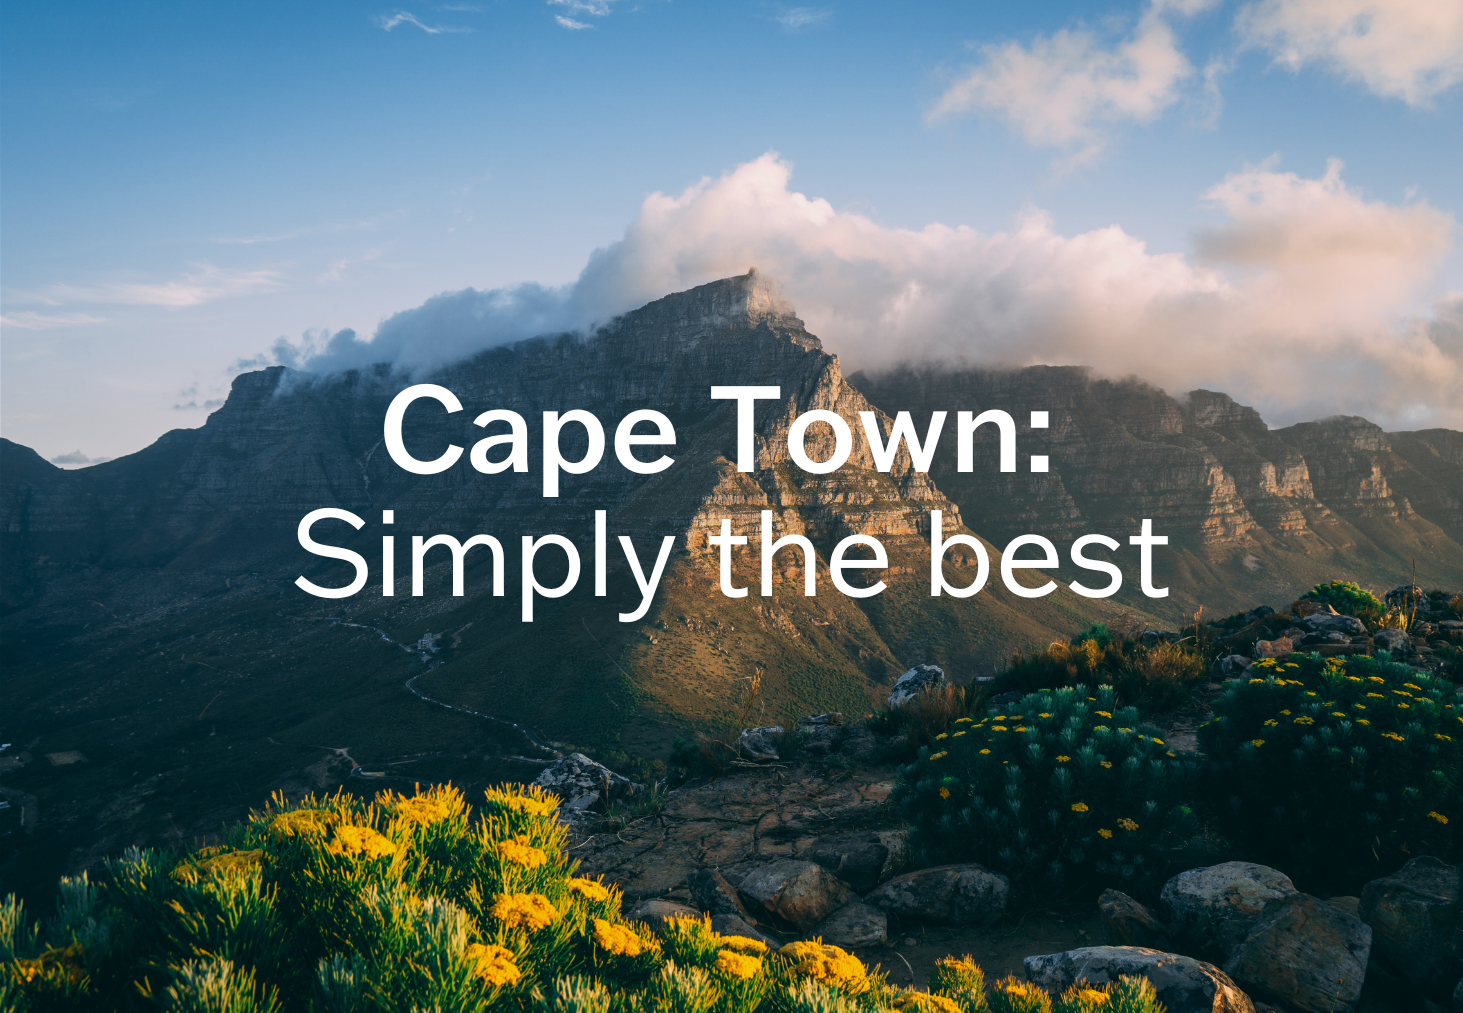 Cape Town beauty with breathtaking mountains and dreamy beaches